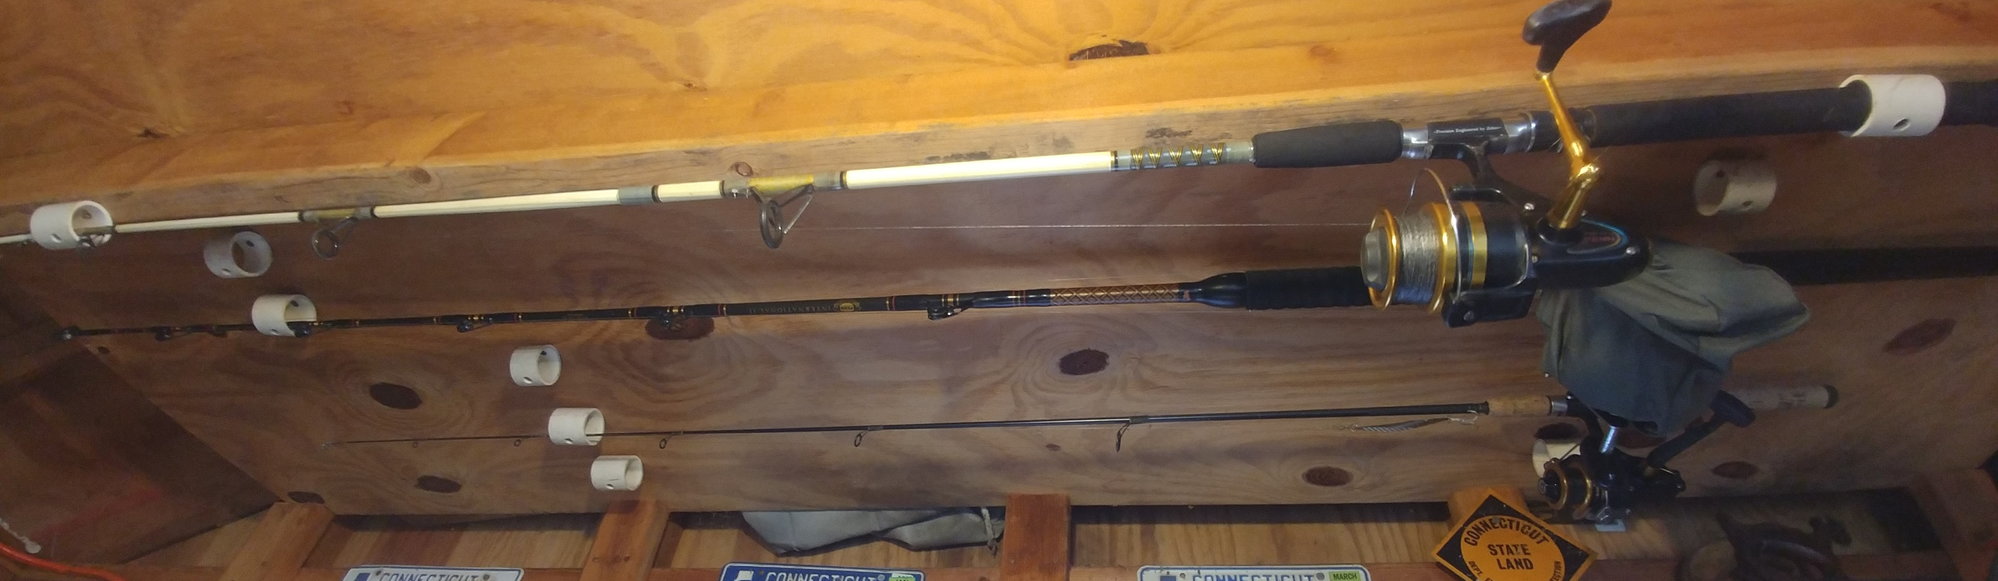 Vertical PVC Rod Storage - The Hull Truth - Boating and Fishing Forum